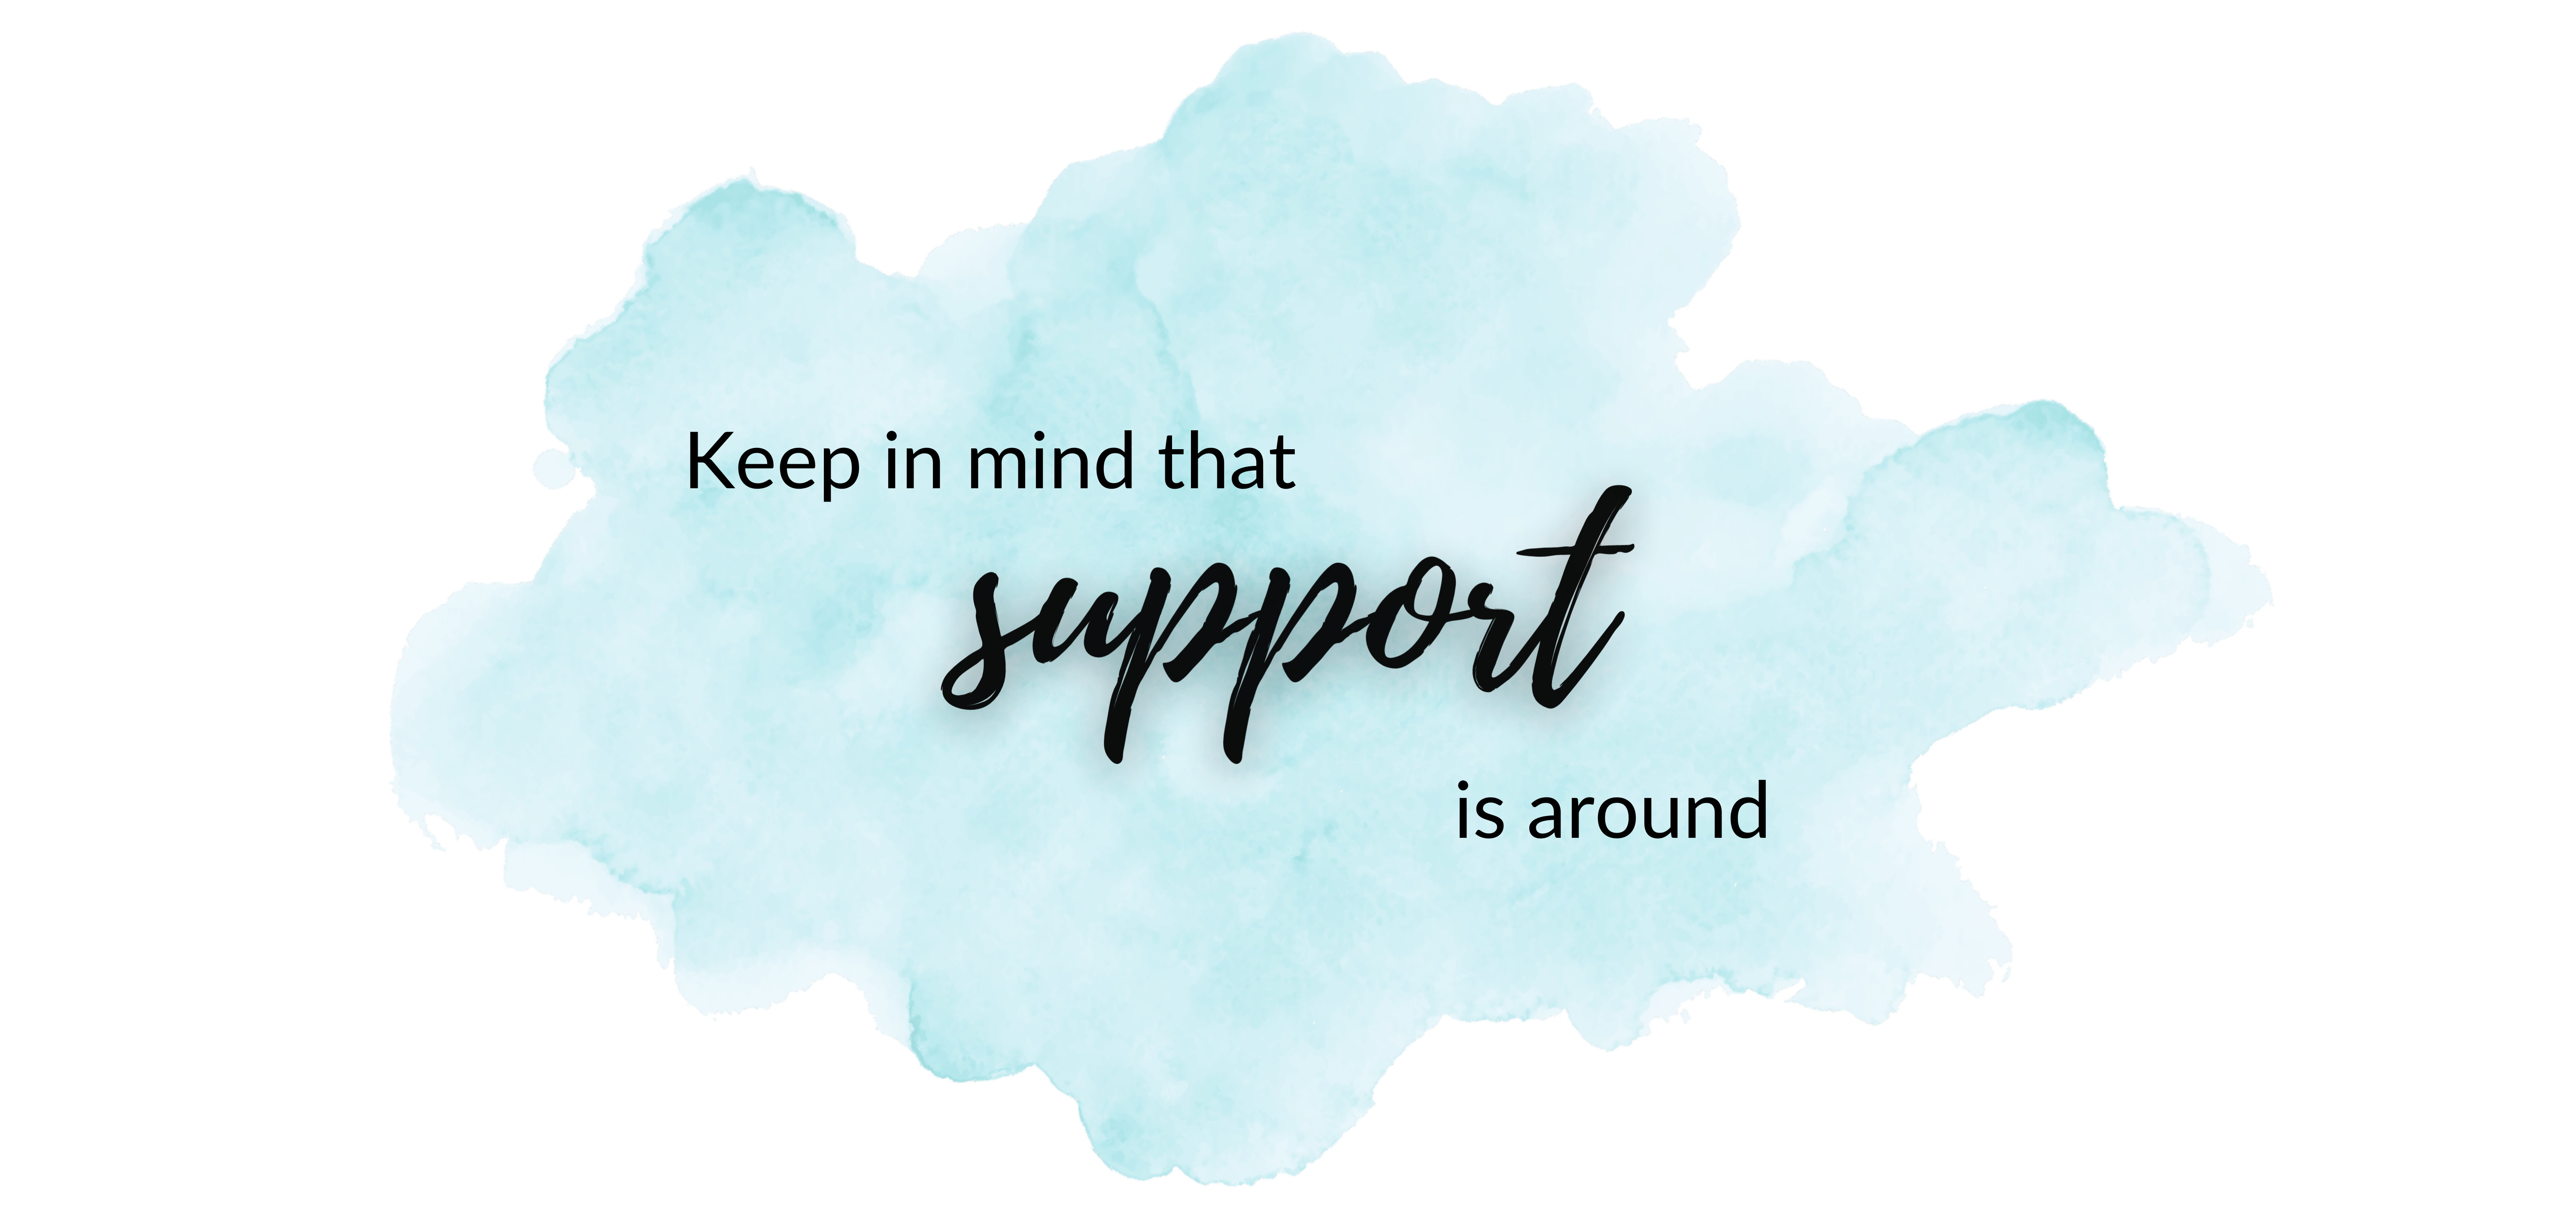 Keep in mind that support is around